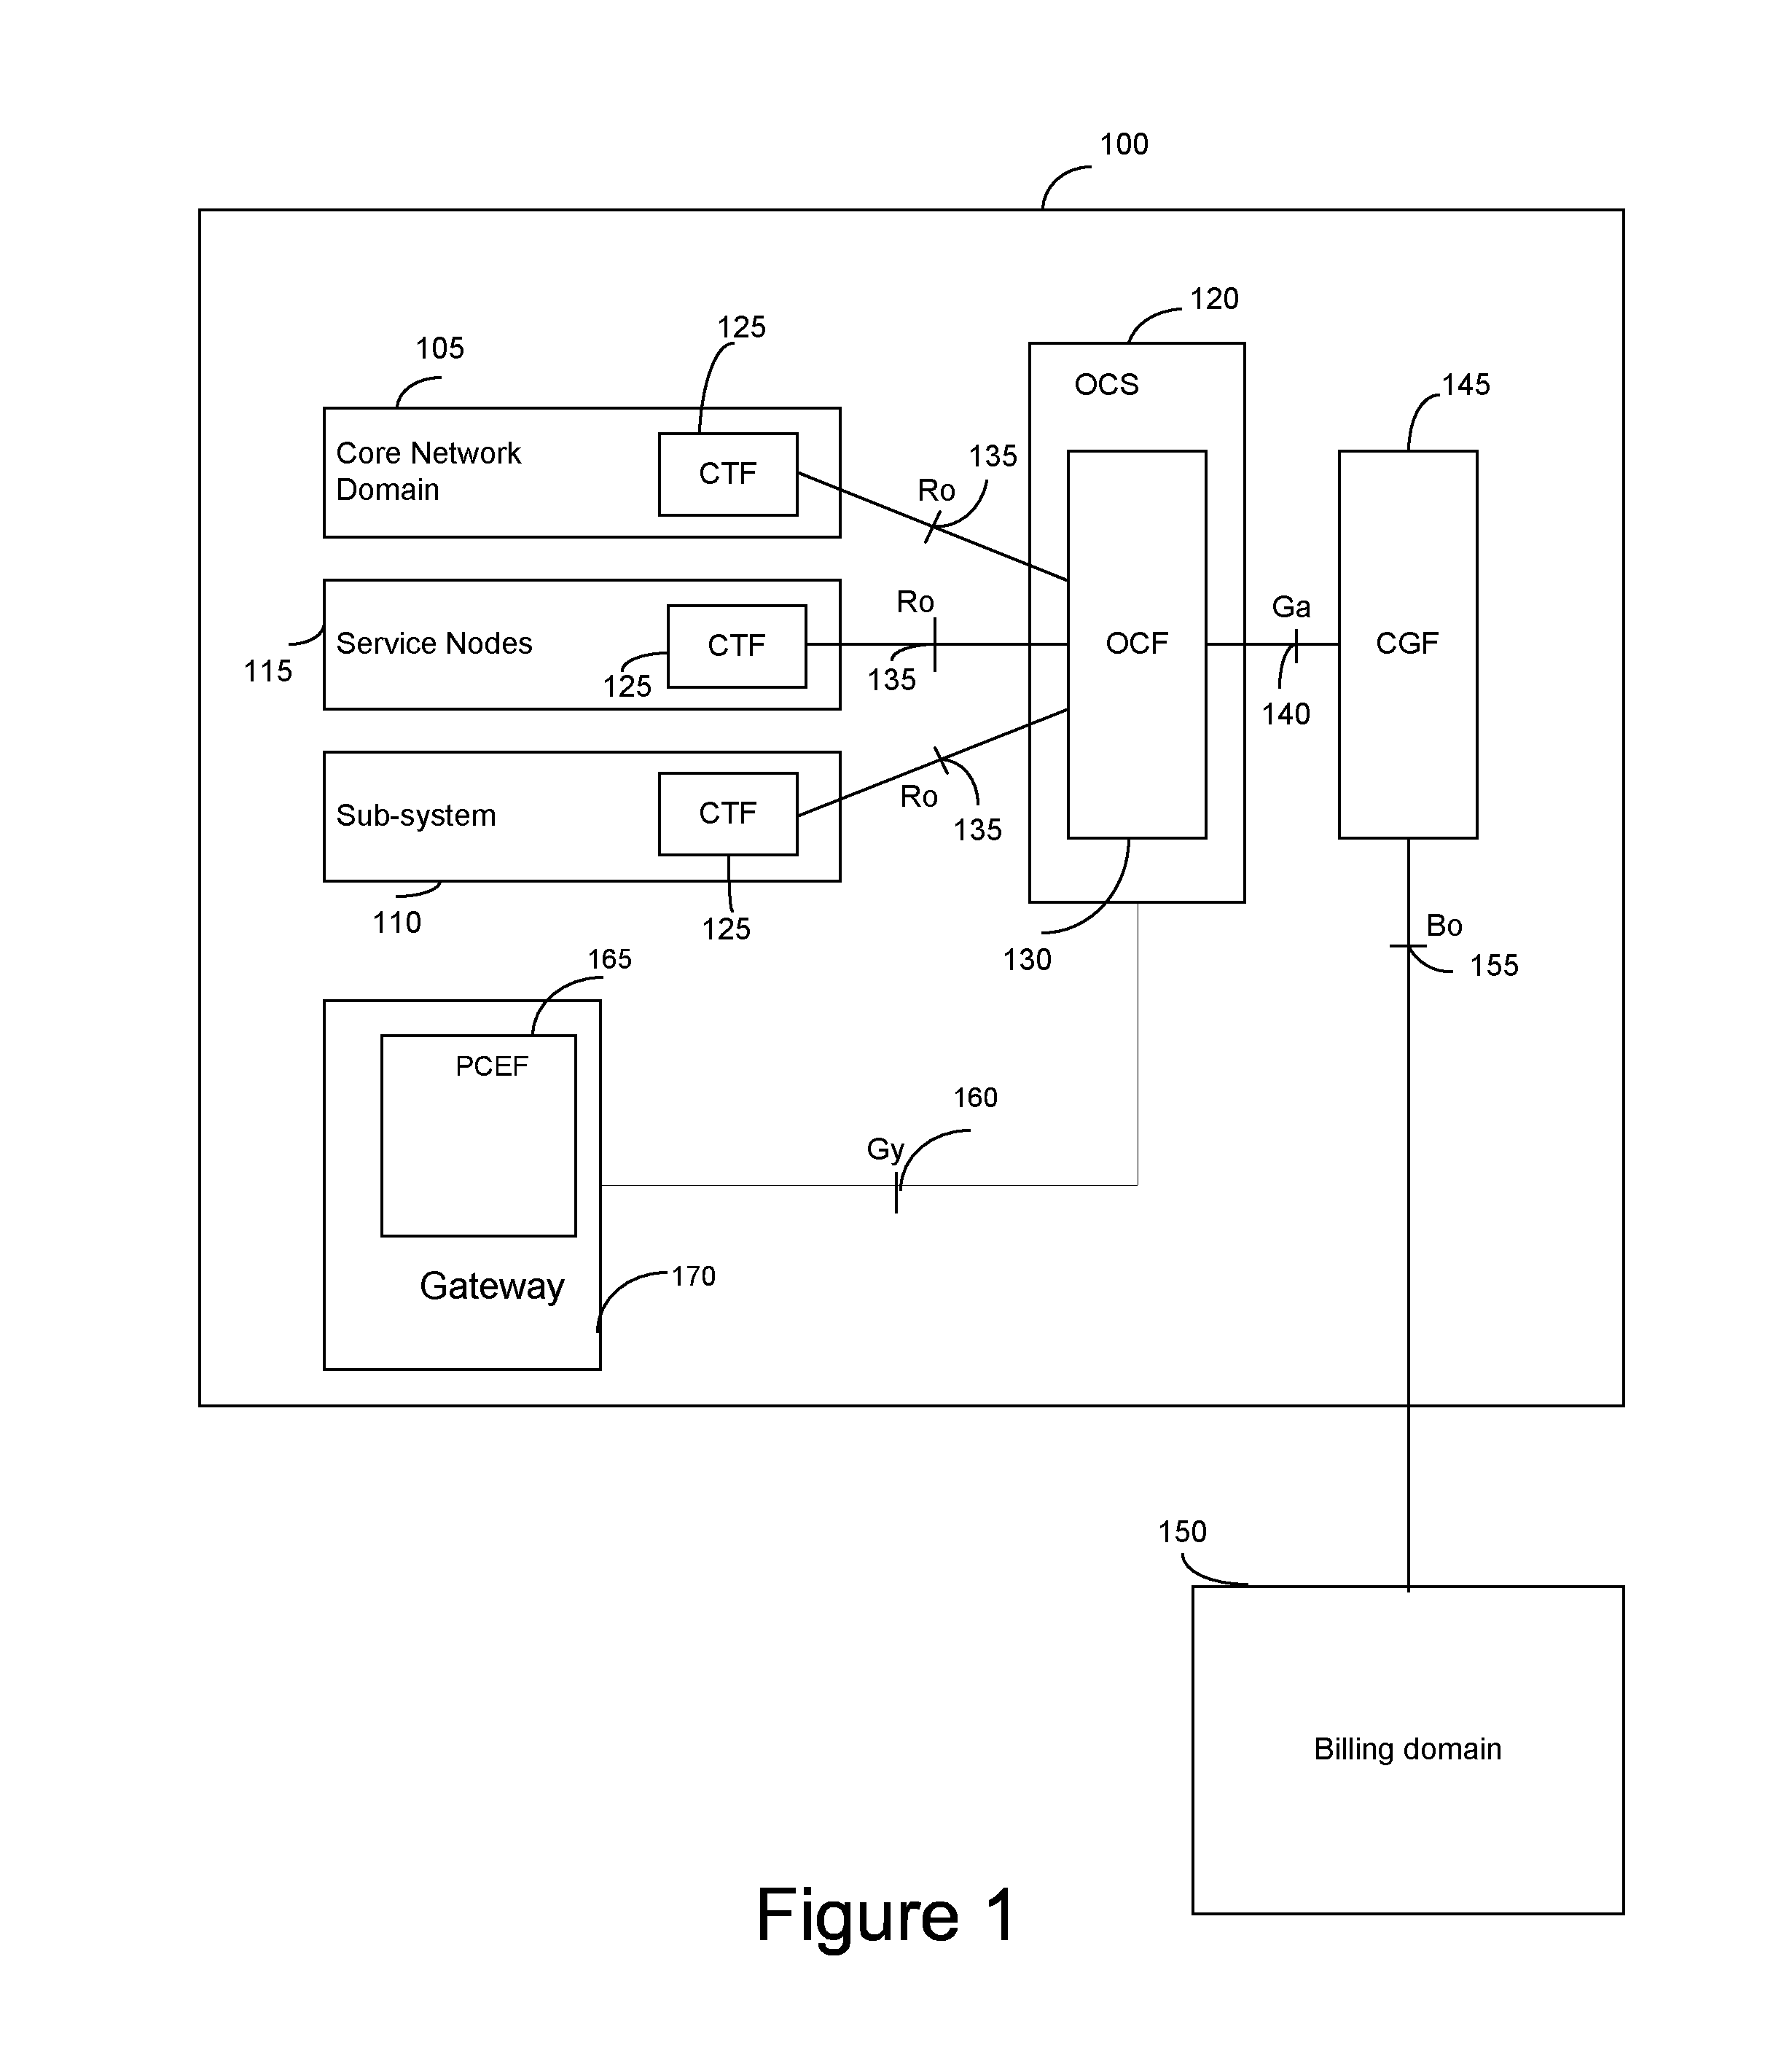 Method and Apparatus for Controlling Charging in a Communication Network